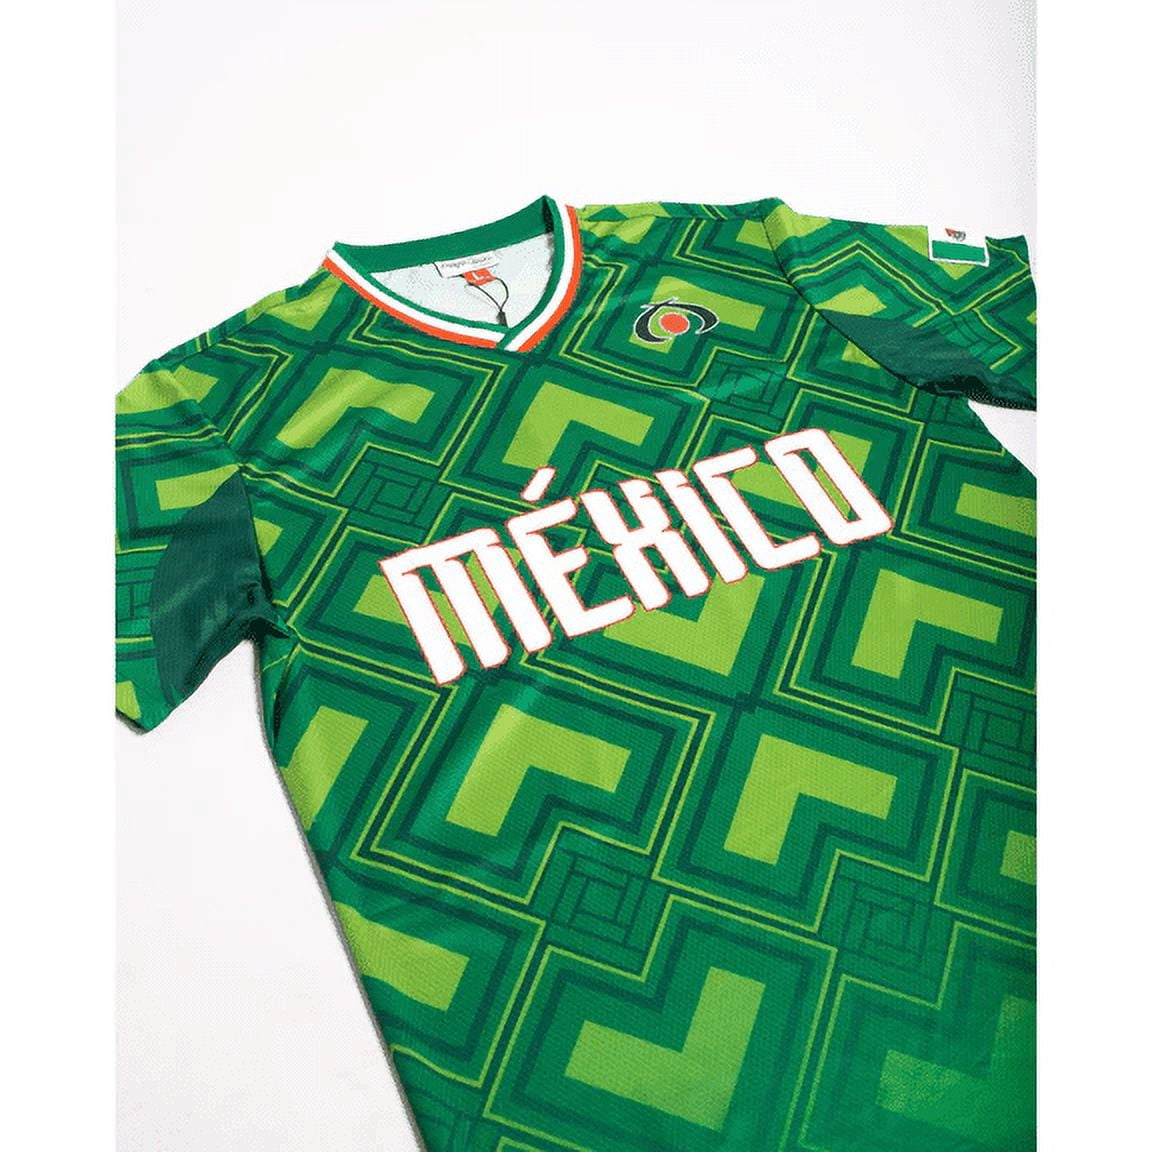 Mexico Personalized Home Long Sleeves Soccer Country Jersey